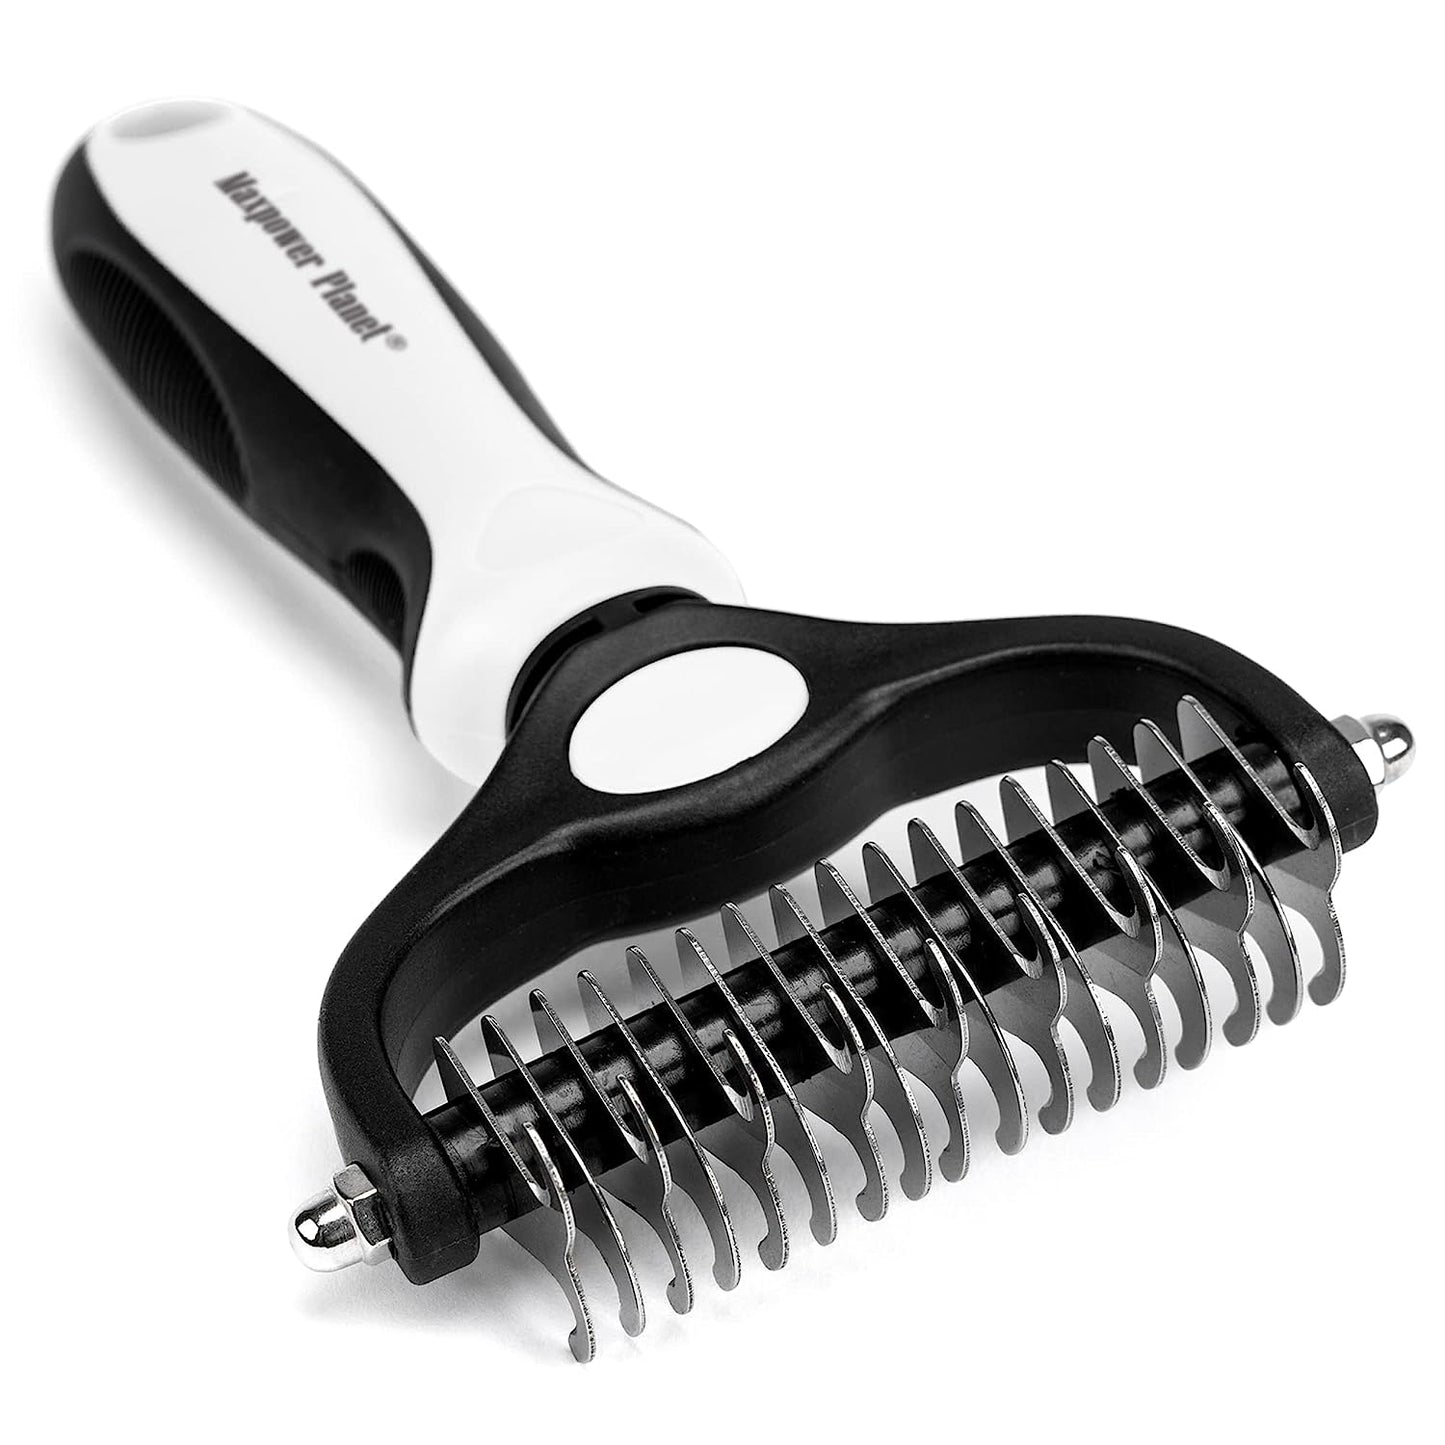 Pet Grooming Brush - Double Sided Shedding and Dematting Undercoat Rake Comb for Dogs and Cats,Extra Wide, White, Dog Grooming Brush, Dog Shedding Brush